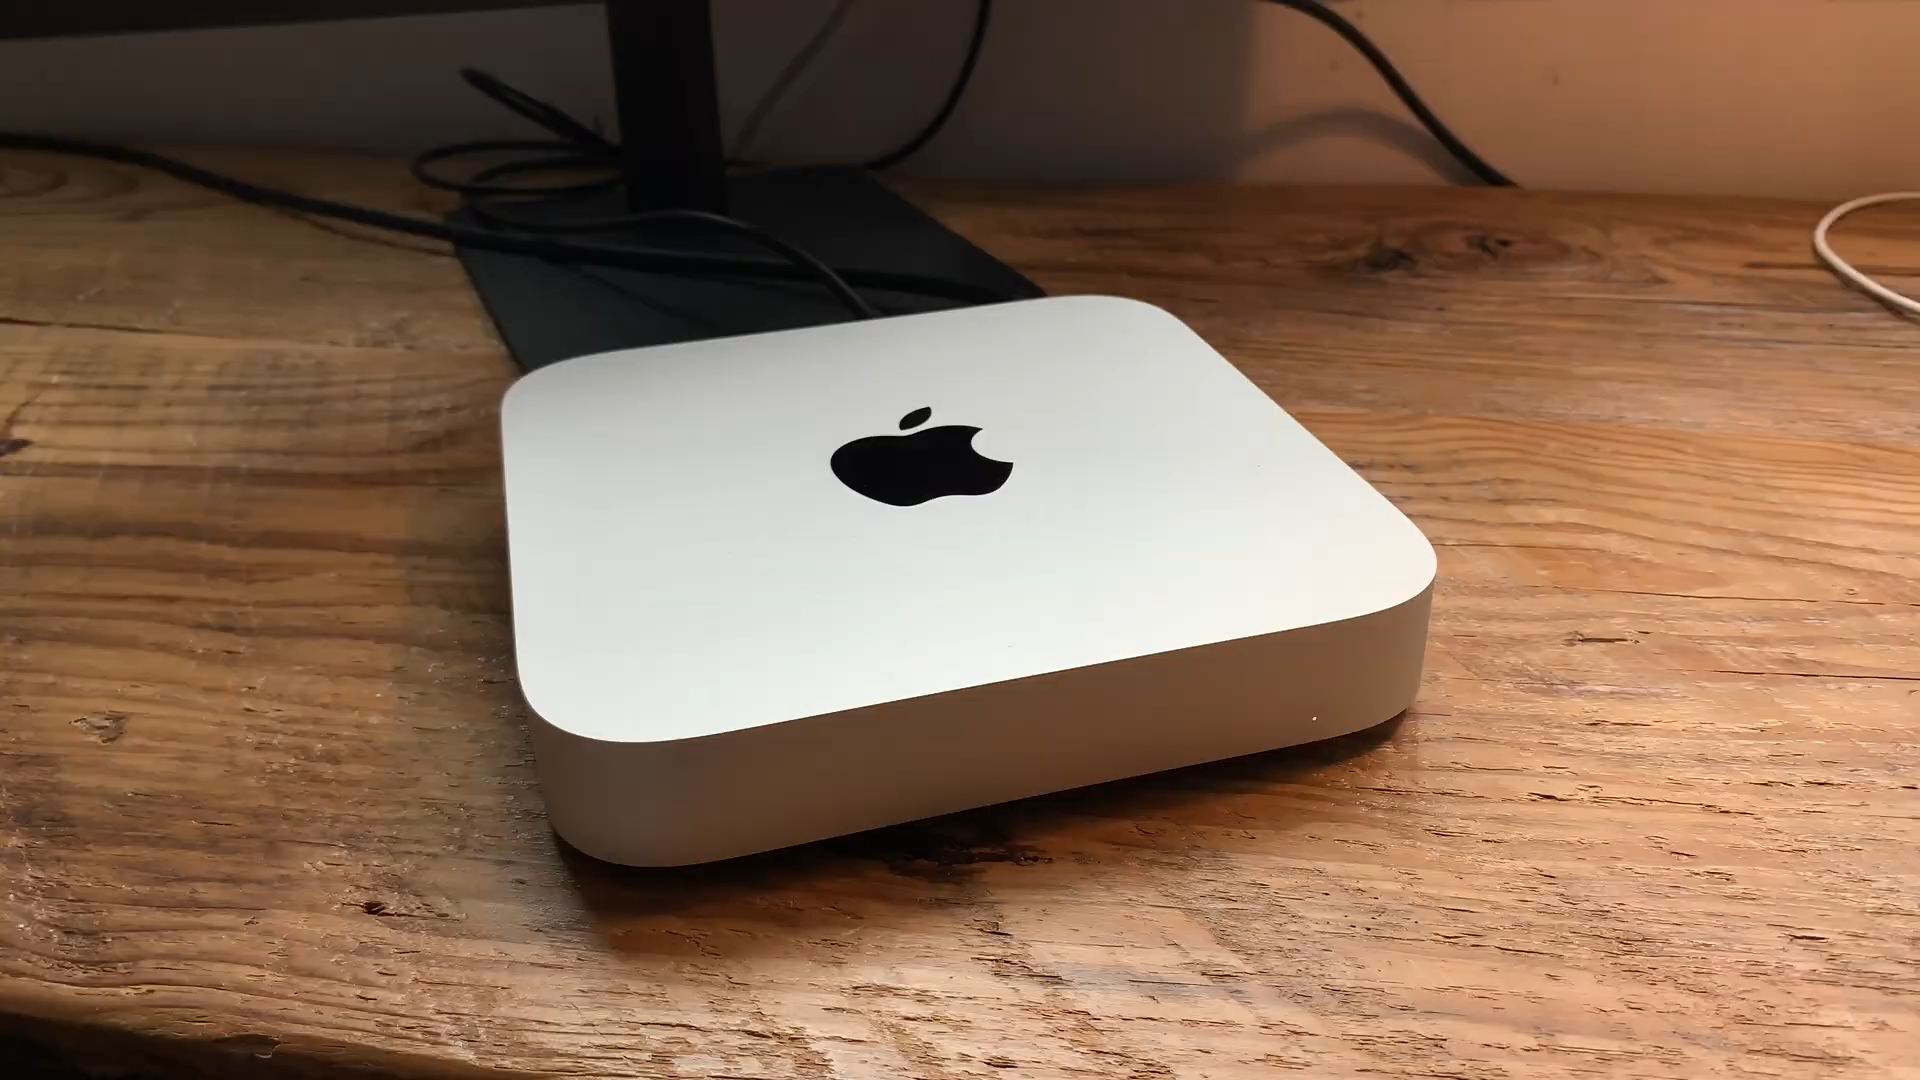 3 Months with the M1 Mac mini